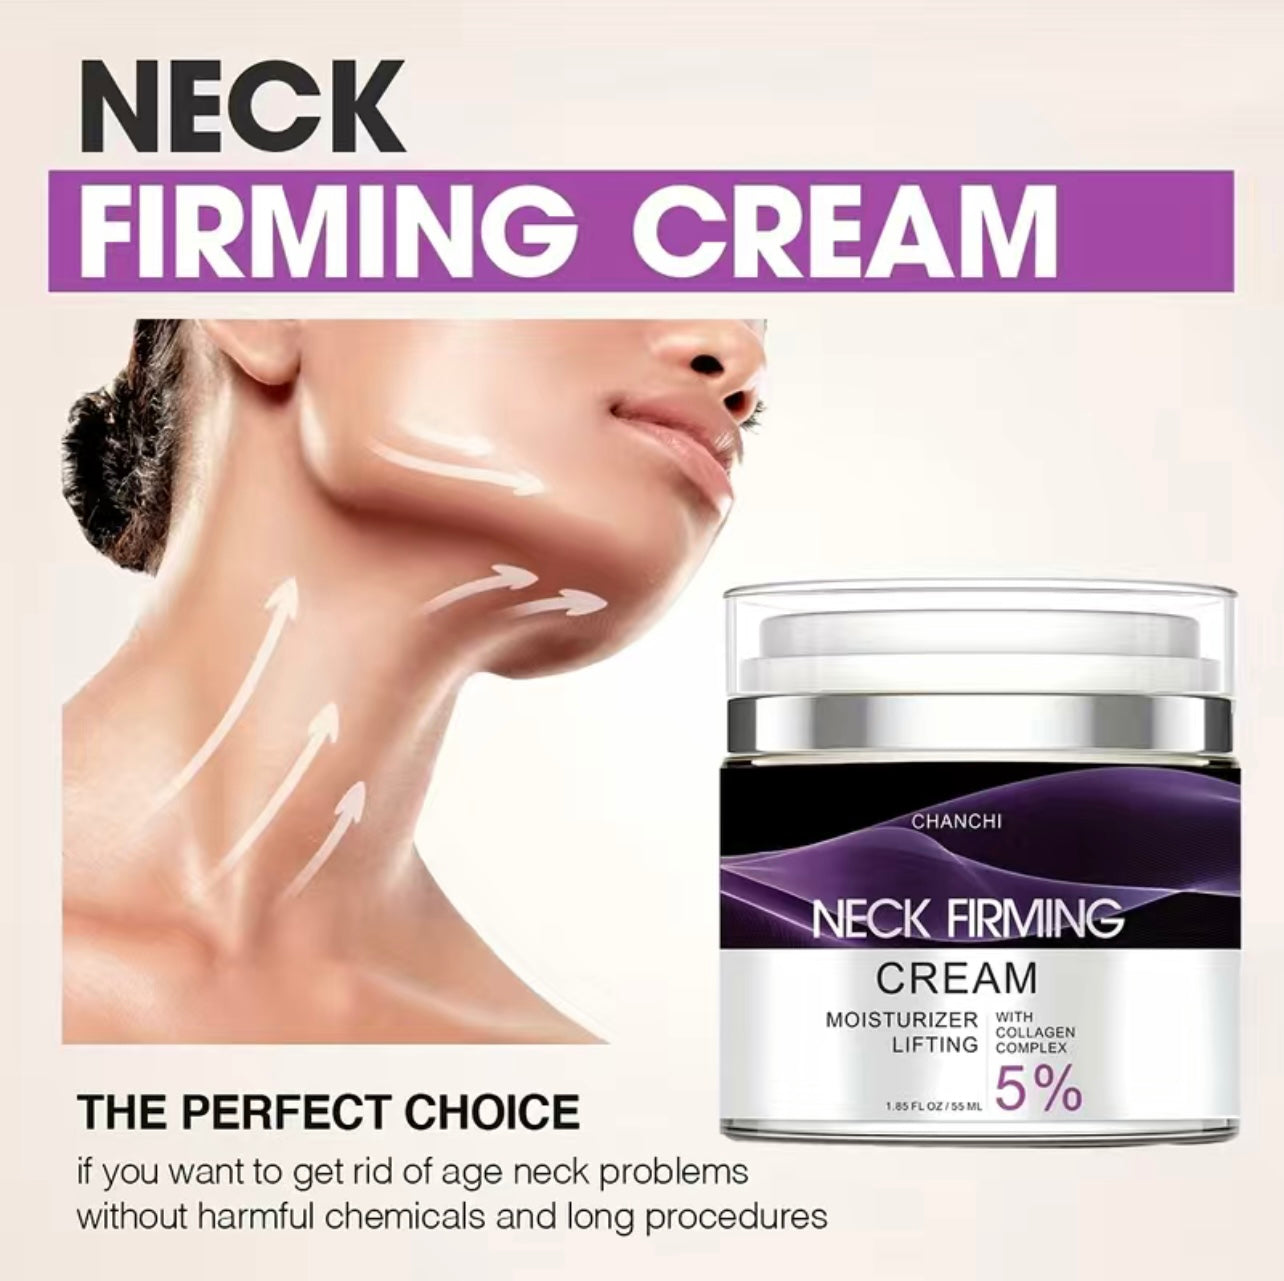 TikTok viral, best selling, trending Top-Rated Neck and Double Chin Firming and Lifting Cream. Neck Firming Cream, Facial Moisturizer With Retinol Collagen And Hyaluronic Acid, Day and Night cream. Smoothes Wrinkles, Face Cream For Women And Men, Double Chin Reducer, Skin Tightening, Lifting Hydrating Cruelty-Free